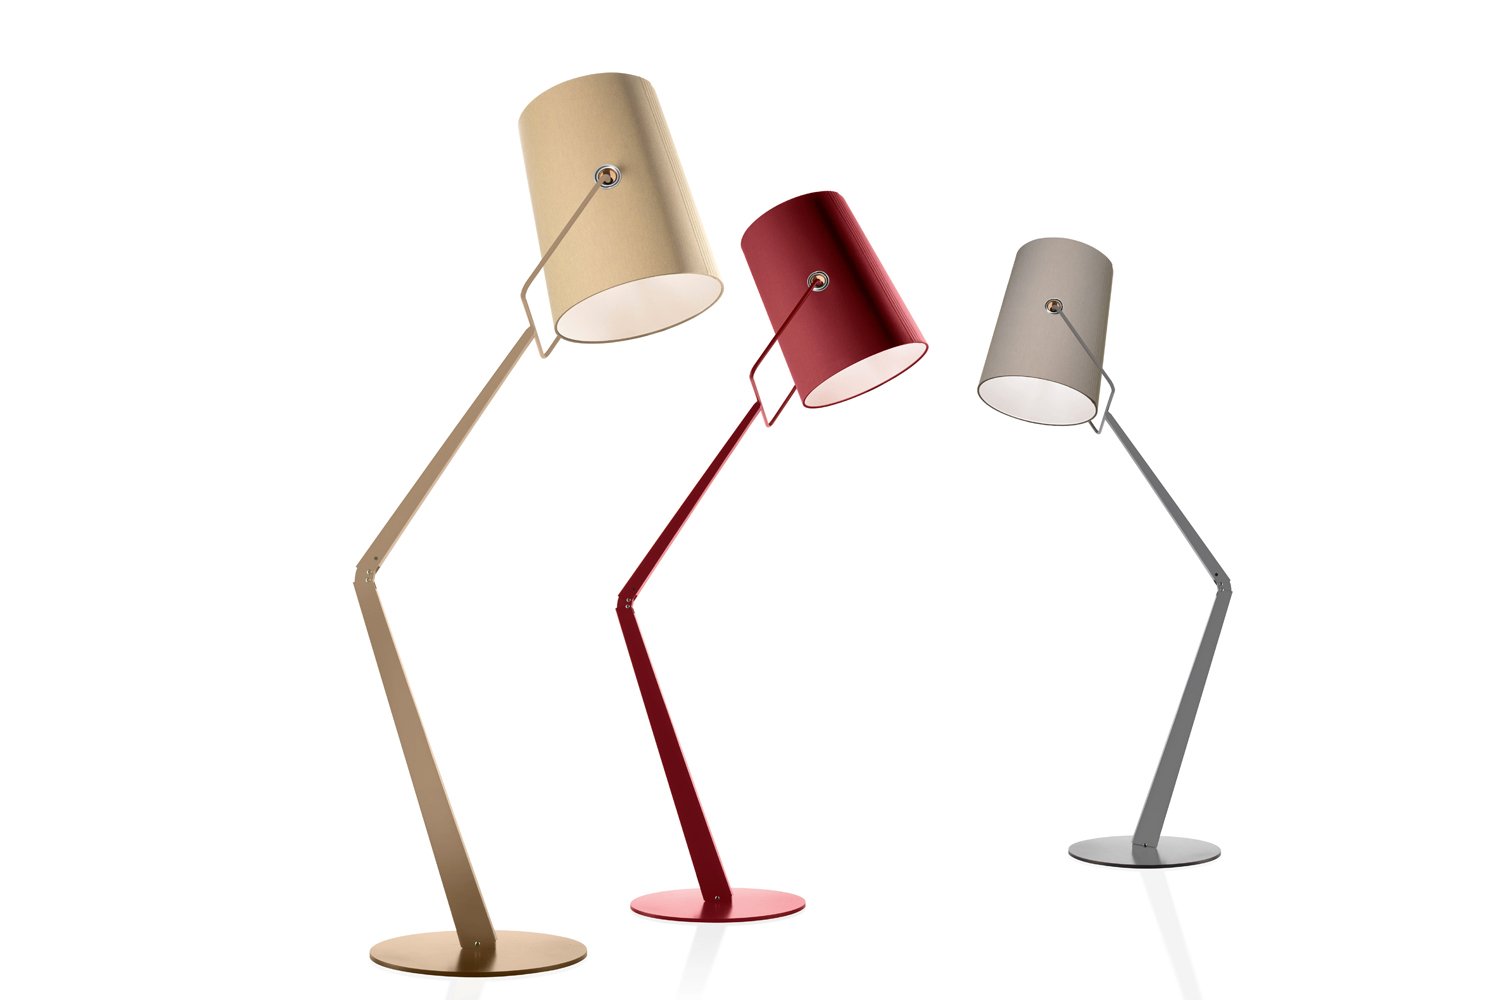 Introducing Fork light a product of a collaboration between Diesel Living and Foscarini The floor lamp uses simplified fabr